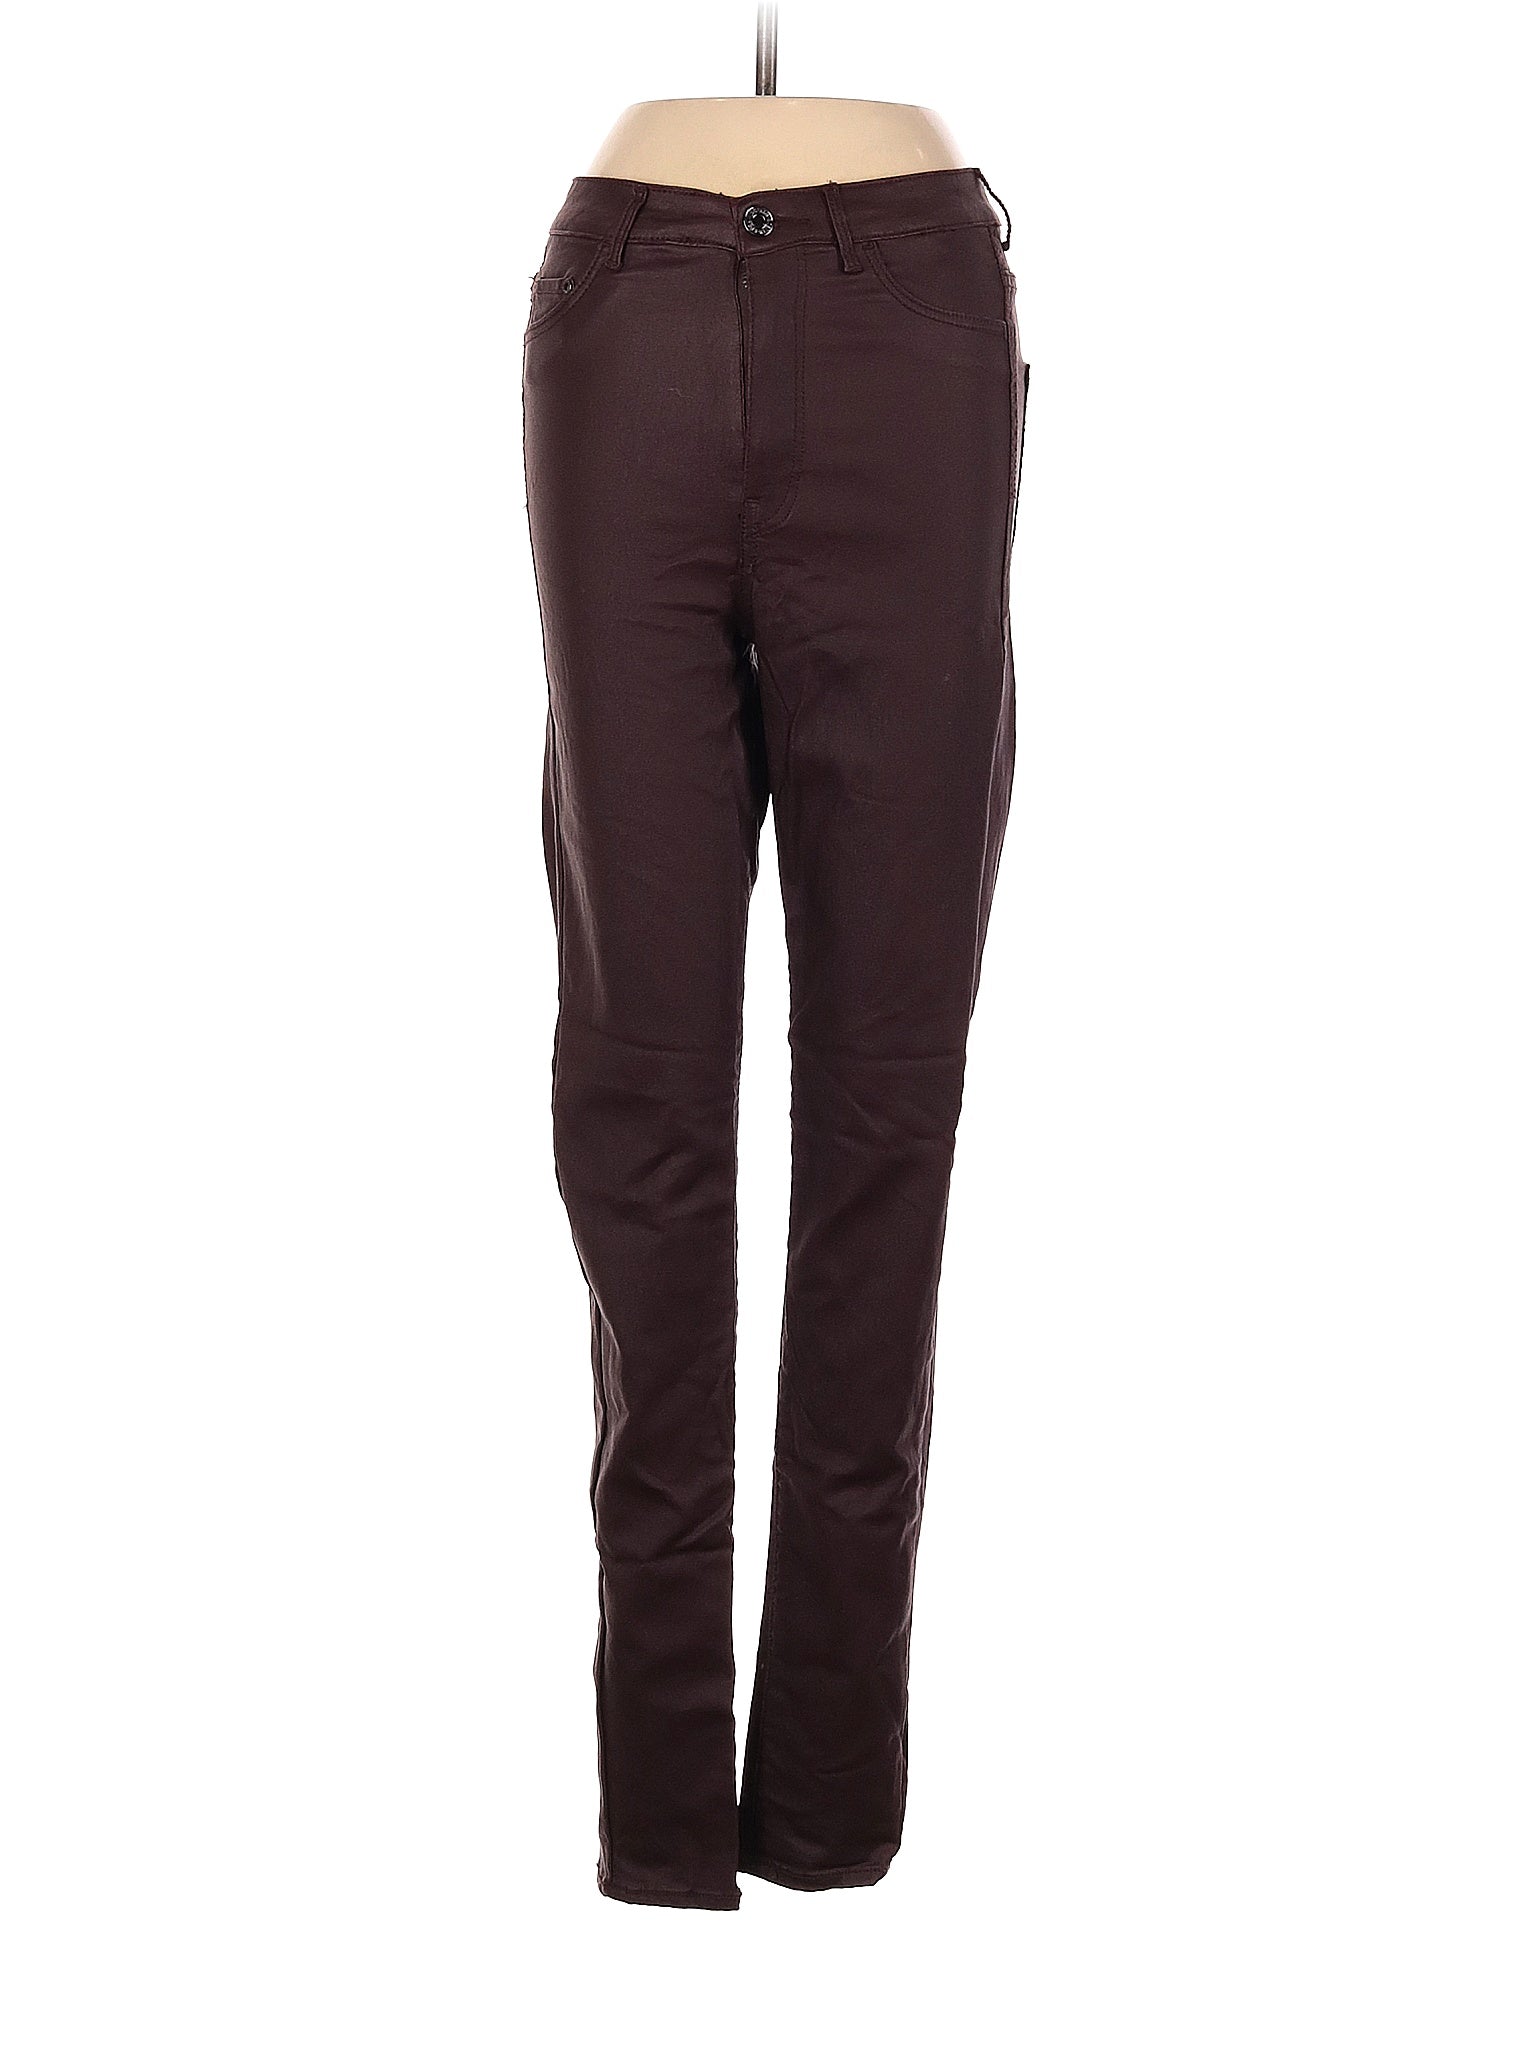 Jeggings size - 26 - 30